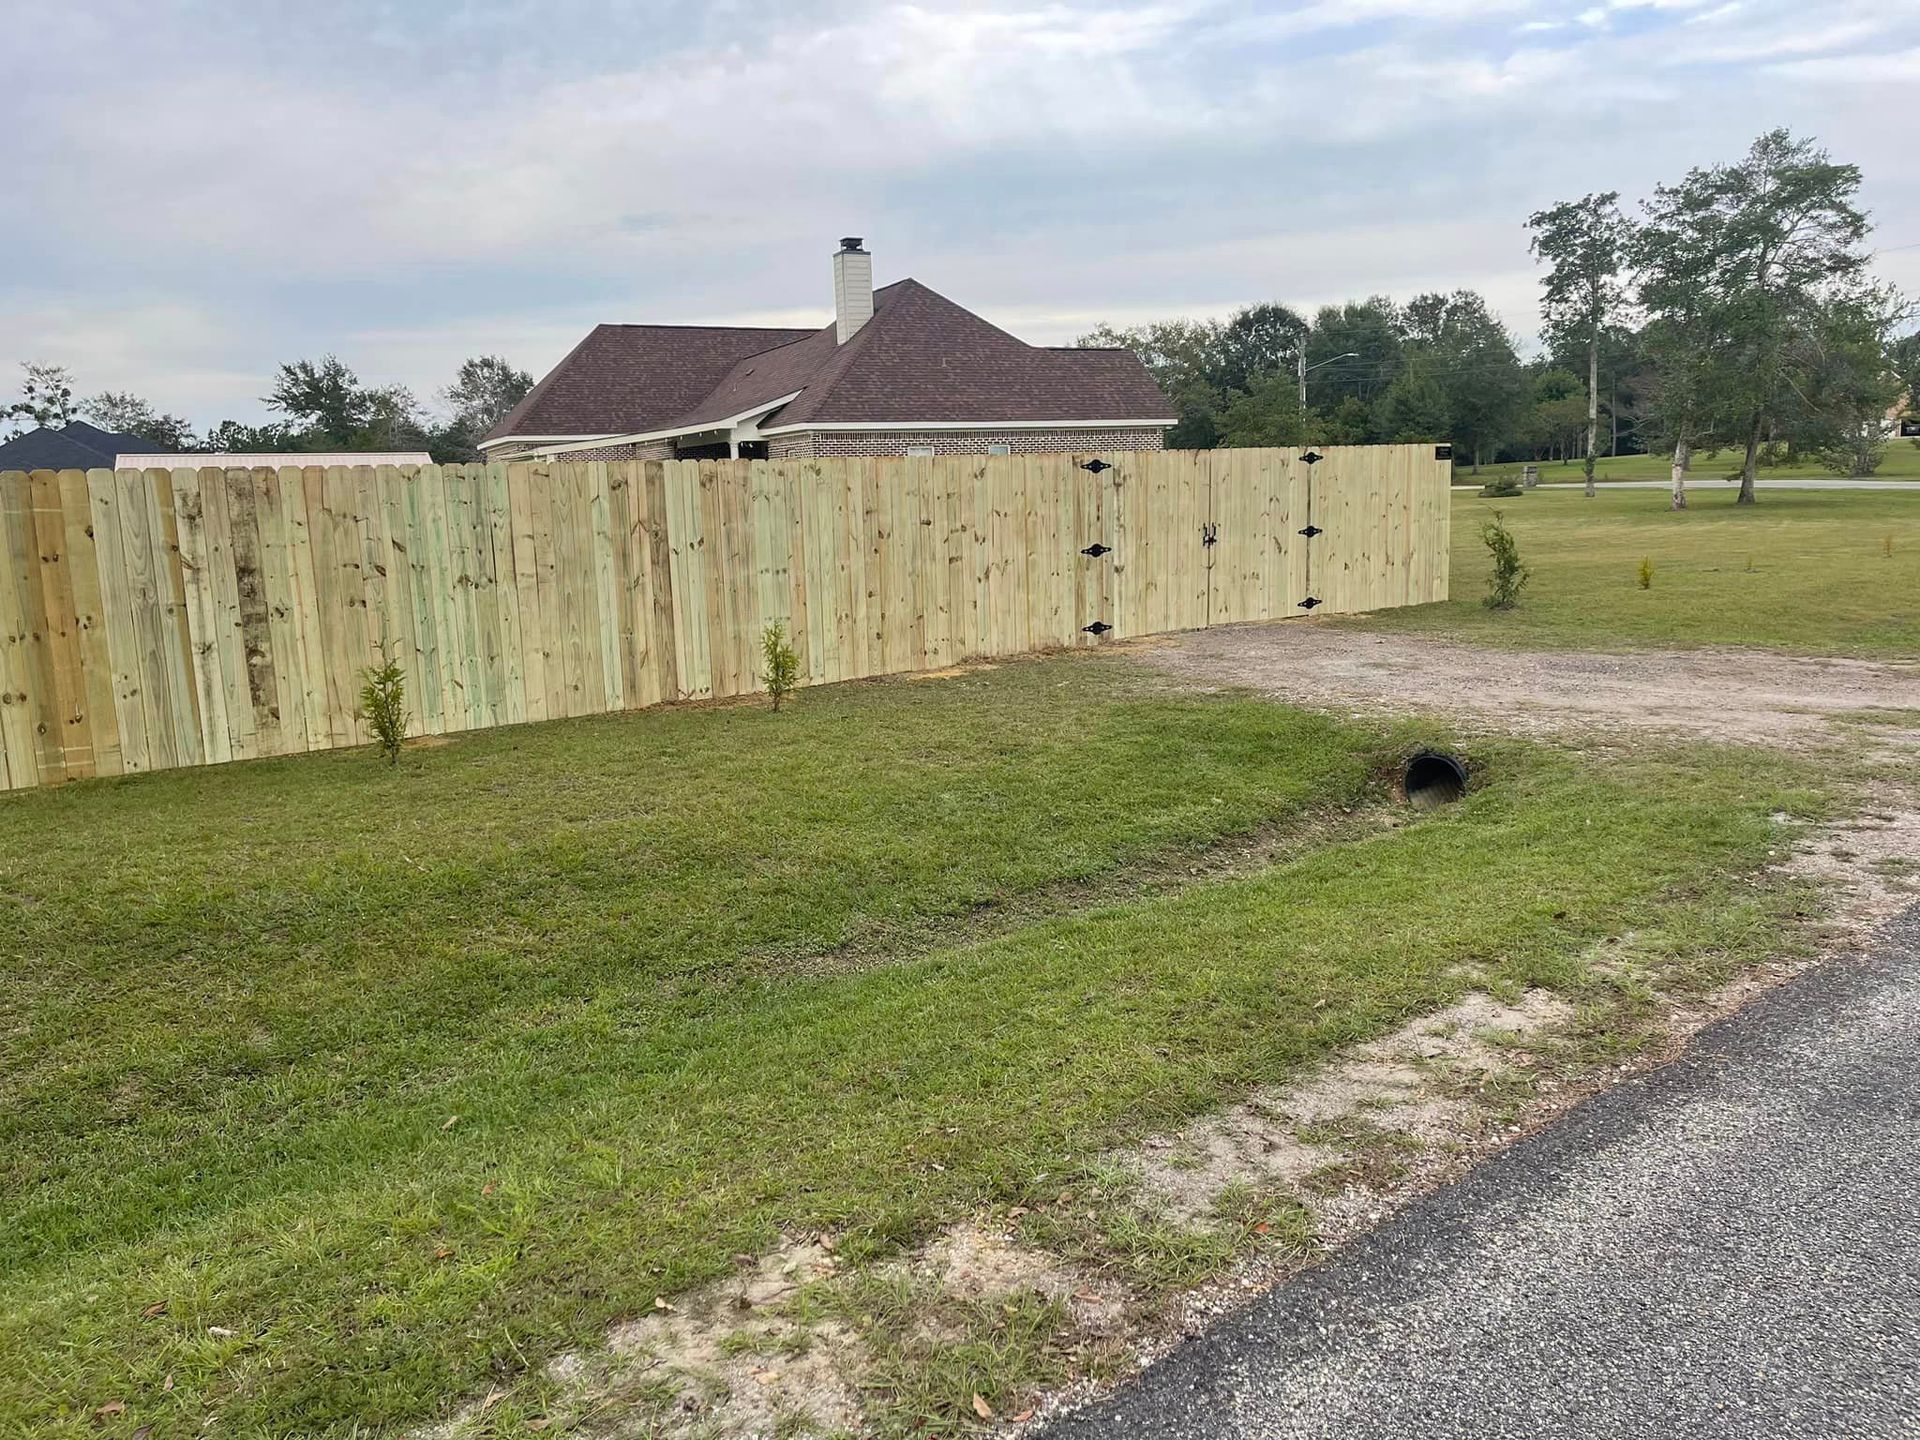 A Wooden Fence with A House in The Background - Mississippi, United States - Magnolia Fencing, LLC